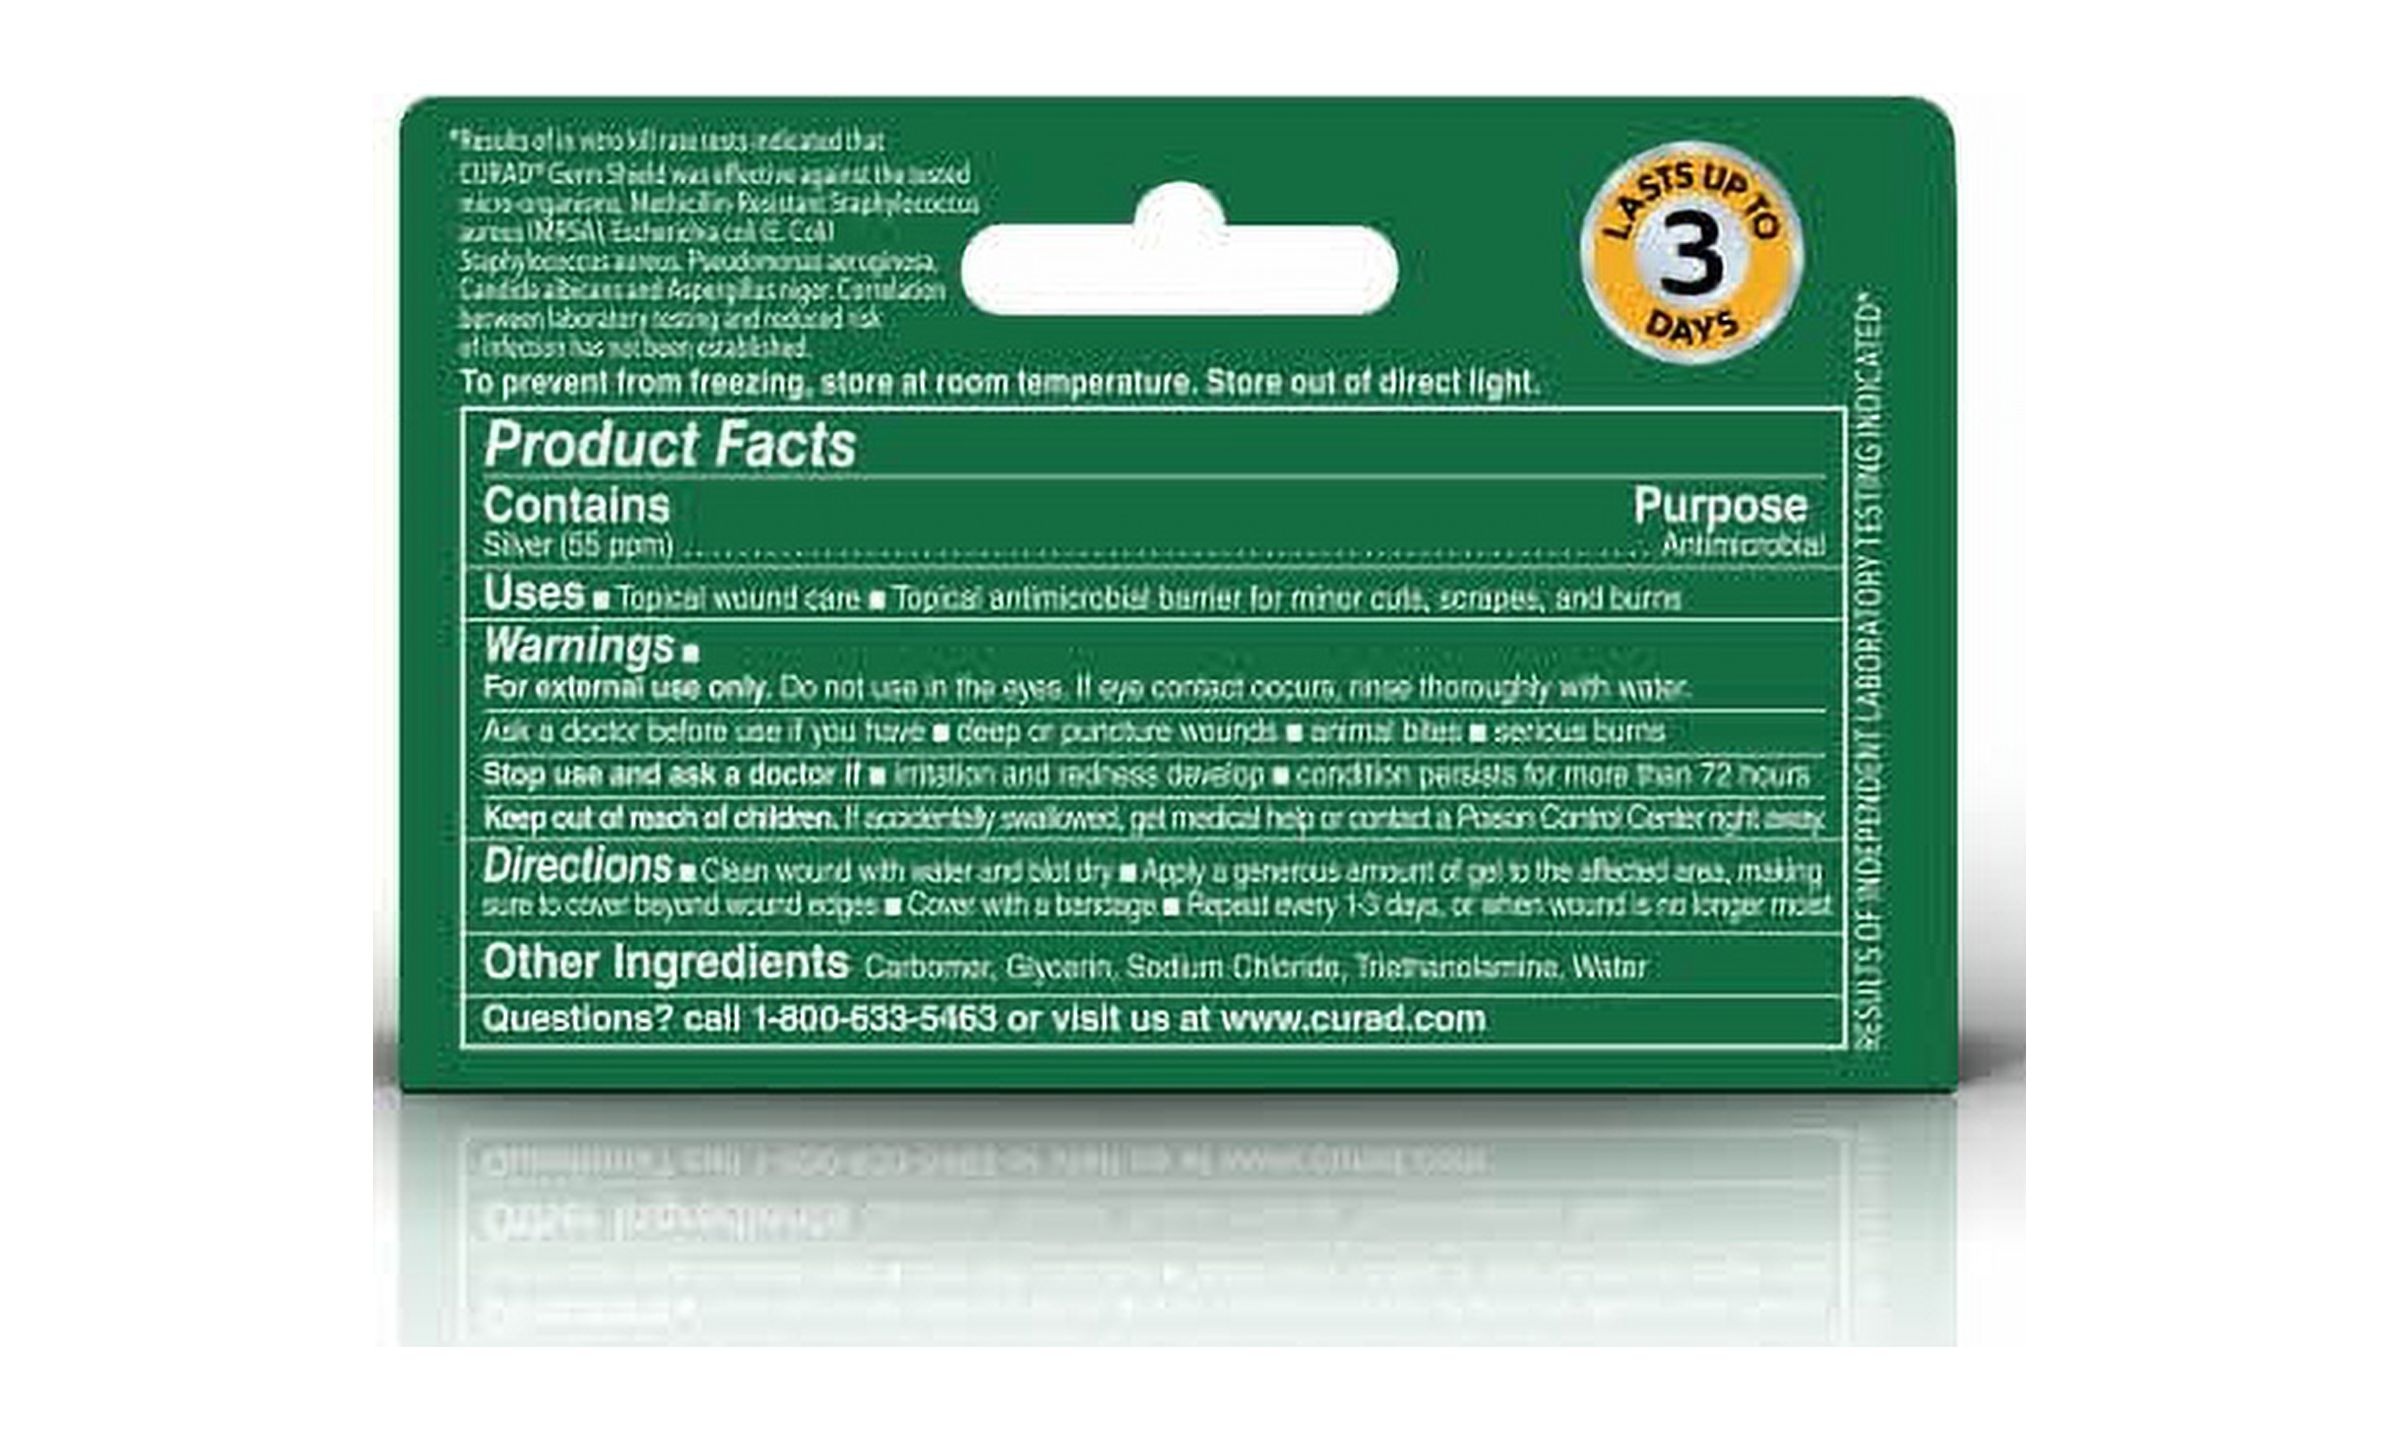 Curad Germ Shield Antimicrobial Silver Wound Gel, For Minor Cuts, Scrapes and Burns, 0.5 Oz Tube, 1 Count - image 4 of 5